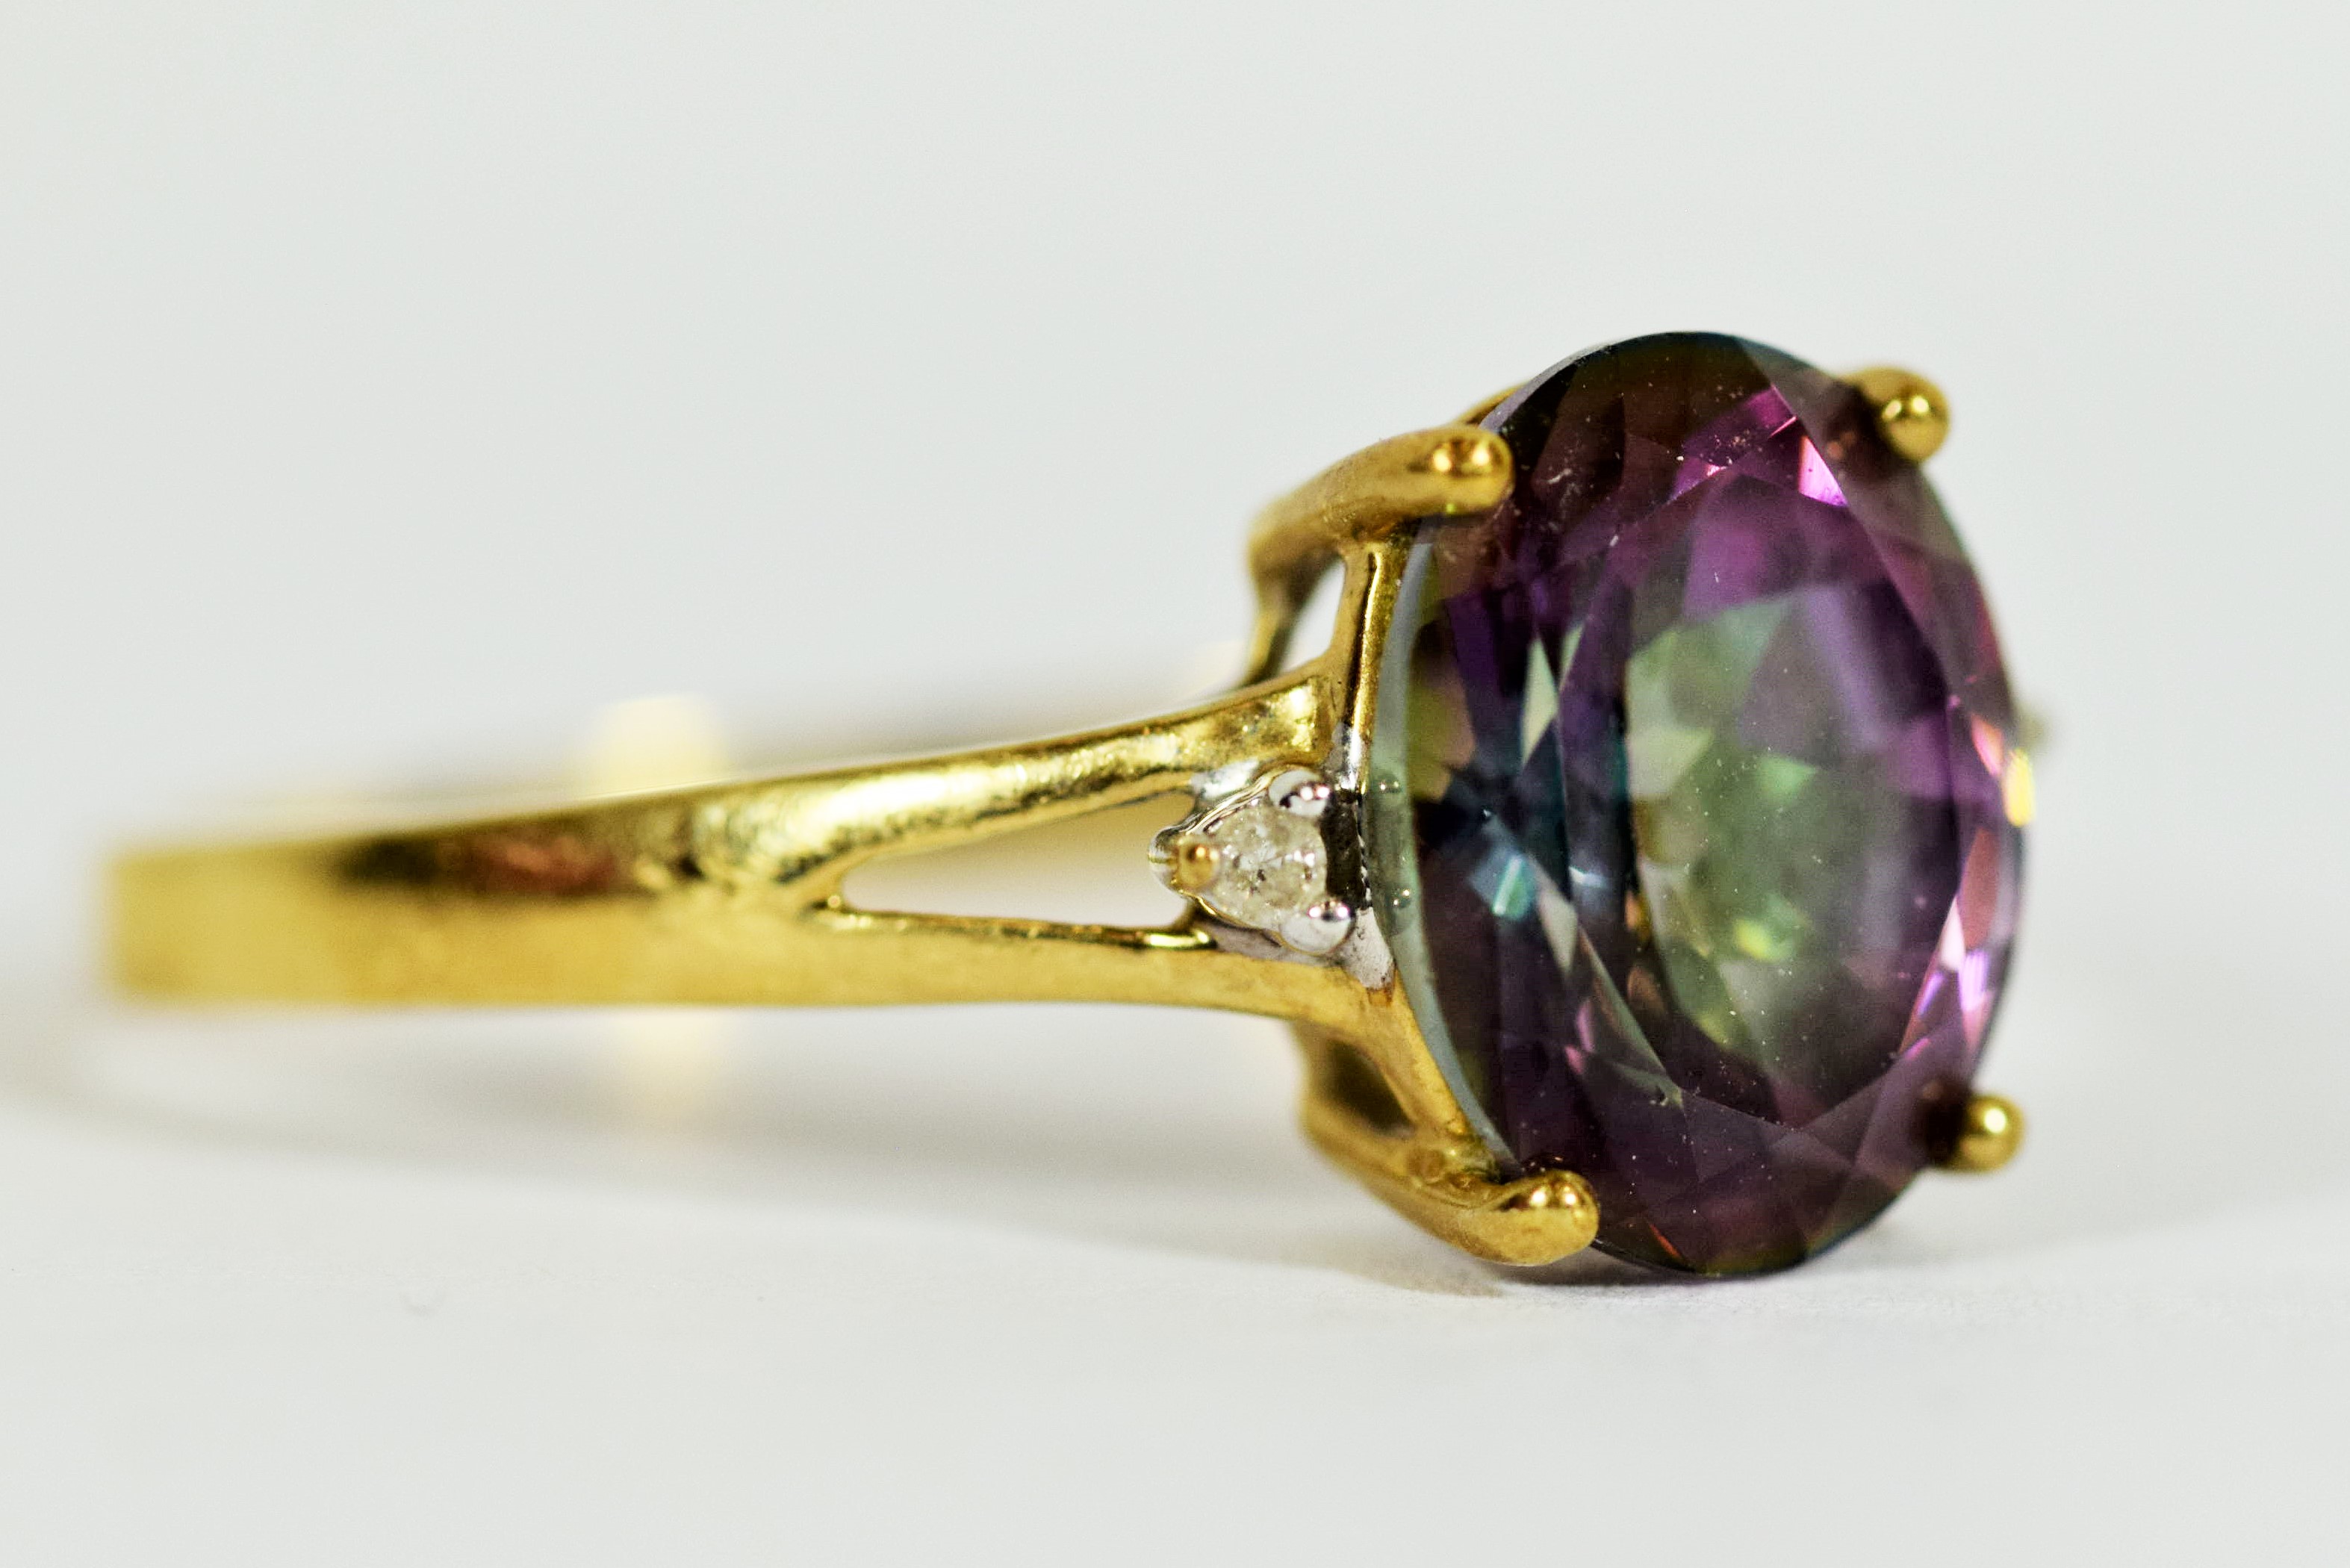 9ct Yellow Gold ring set with a Central Mystic Topaz which measures 11 x 8 mm, Accompanied by two Me - Image 3 of 3